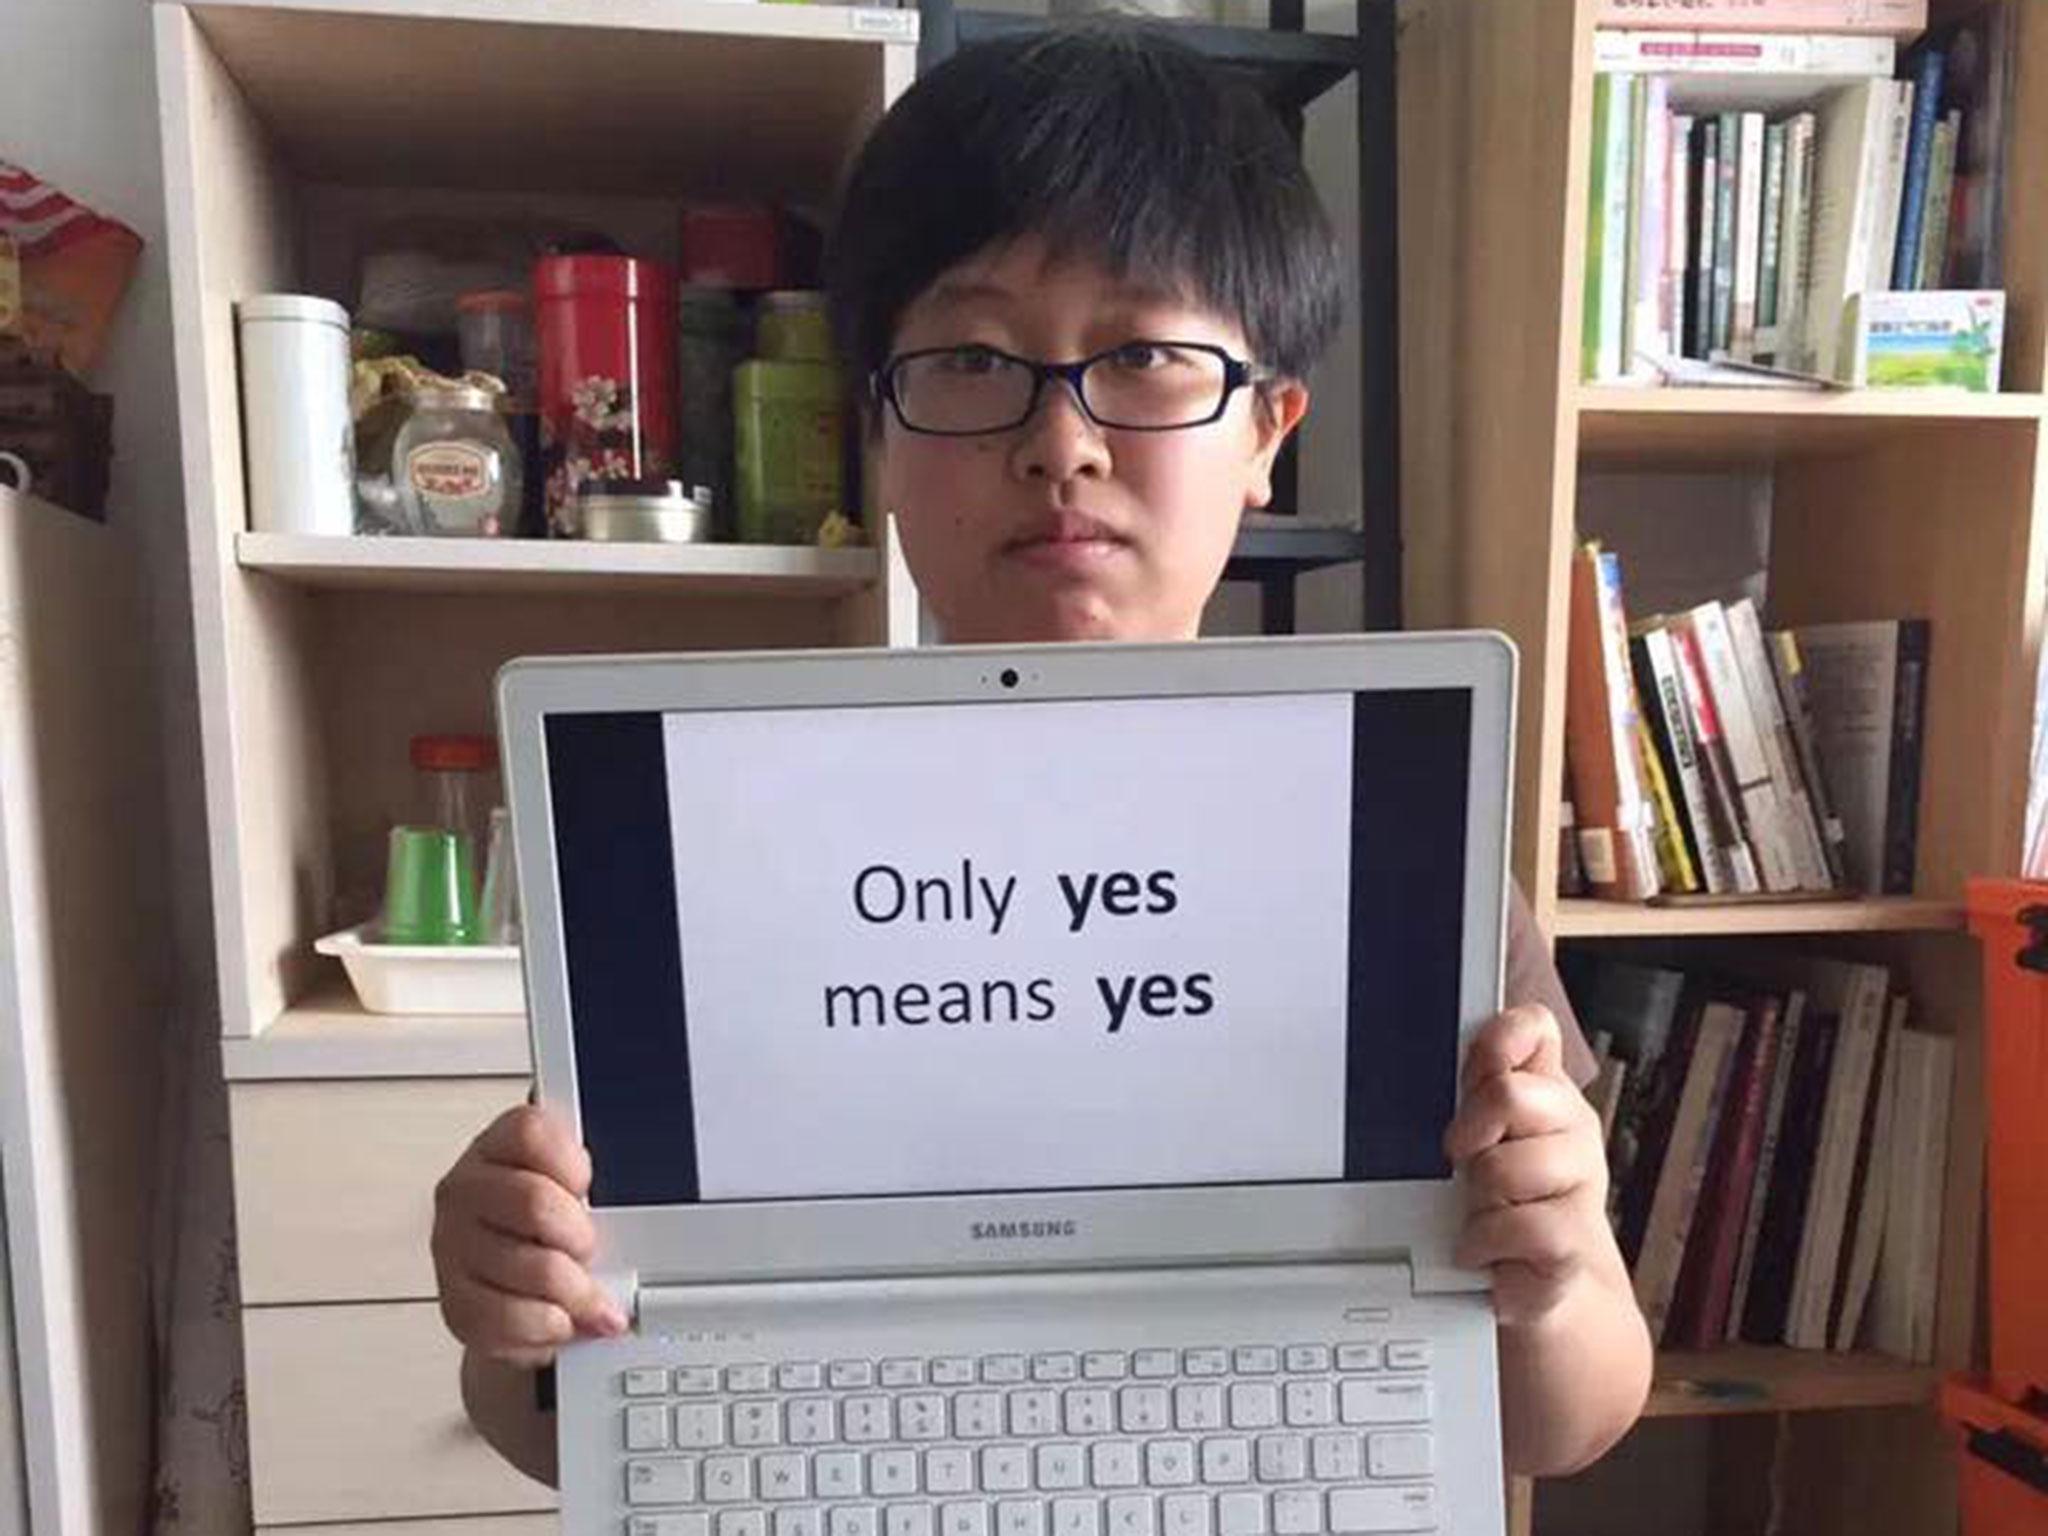 The group, named Free Chinese Feminists, have posted images on Facebook